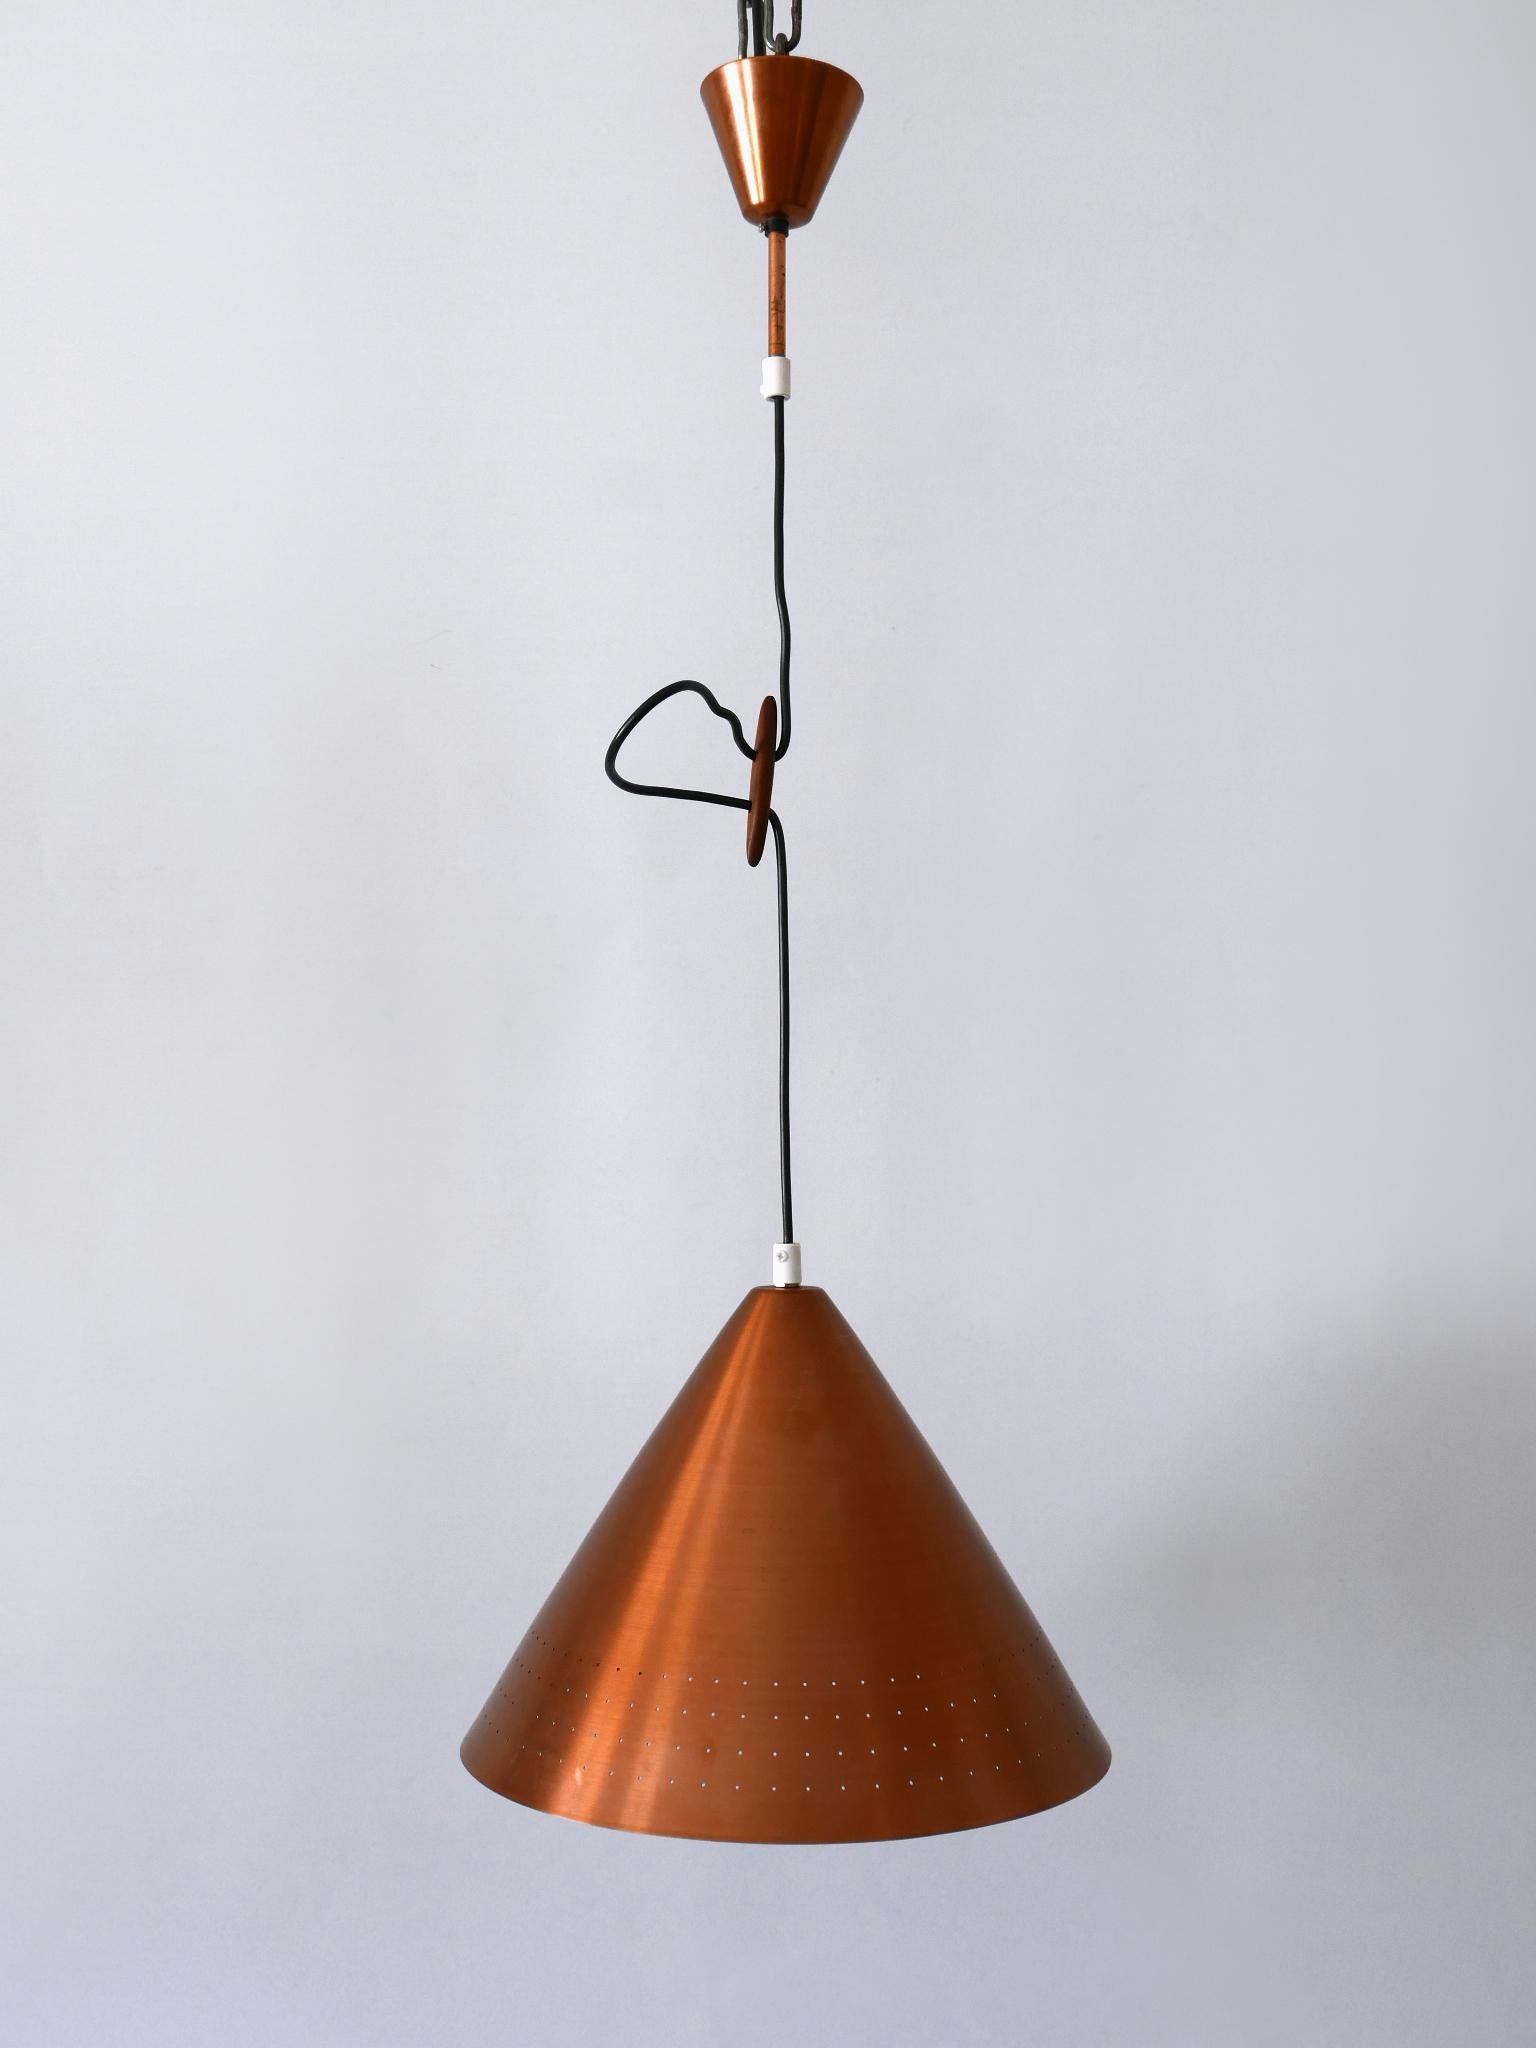 Rare Mid-Century Modern Scandinavian Copper Pendant Lamp or Hanging Light  1960s In Good Condition For Sale In Munich, DE